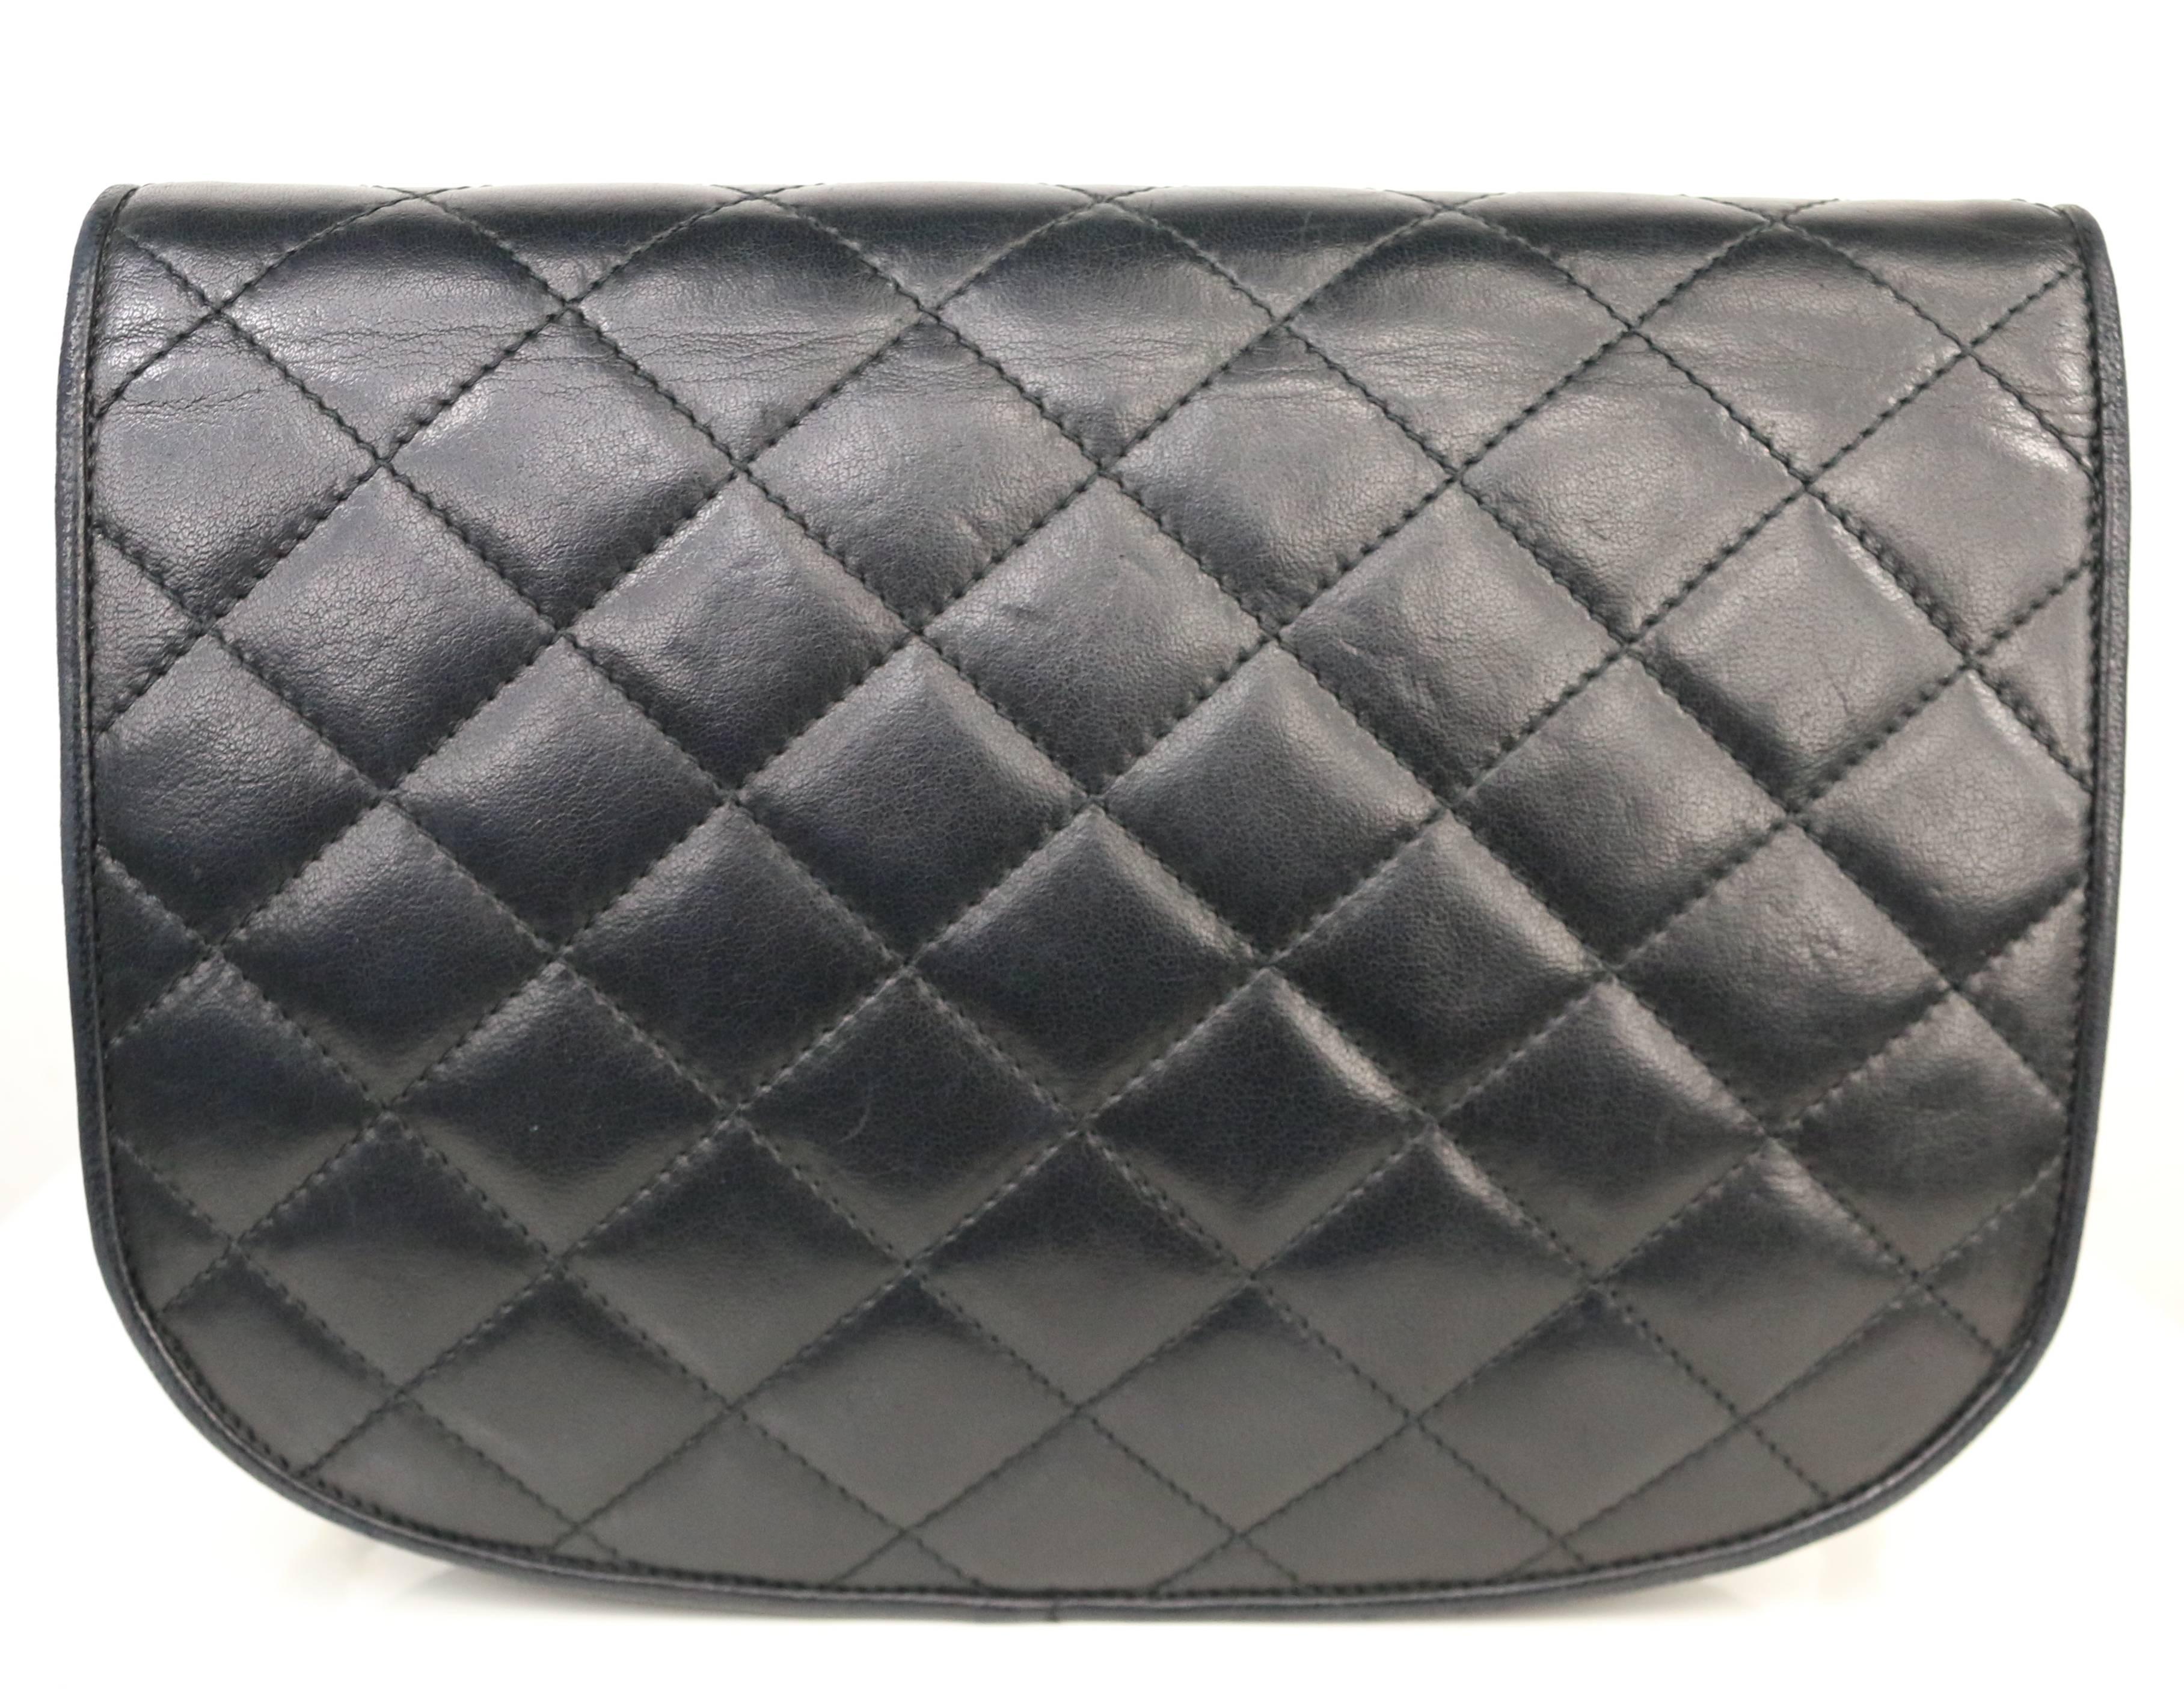 - Vintage 1989 to 1991 Chanel semi circle black quilted lambskin leather shoulder bag. This bag is Paris limited edition that is really rare!

- Featuring a silver-toned and gold-toned hardware 